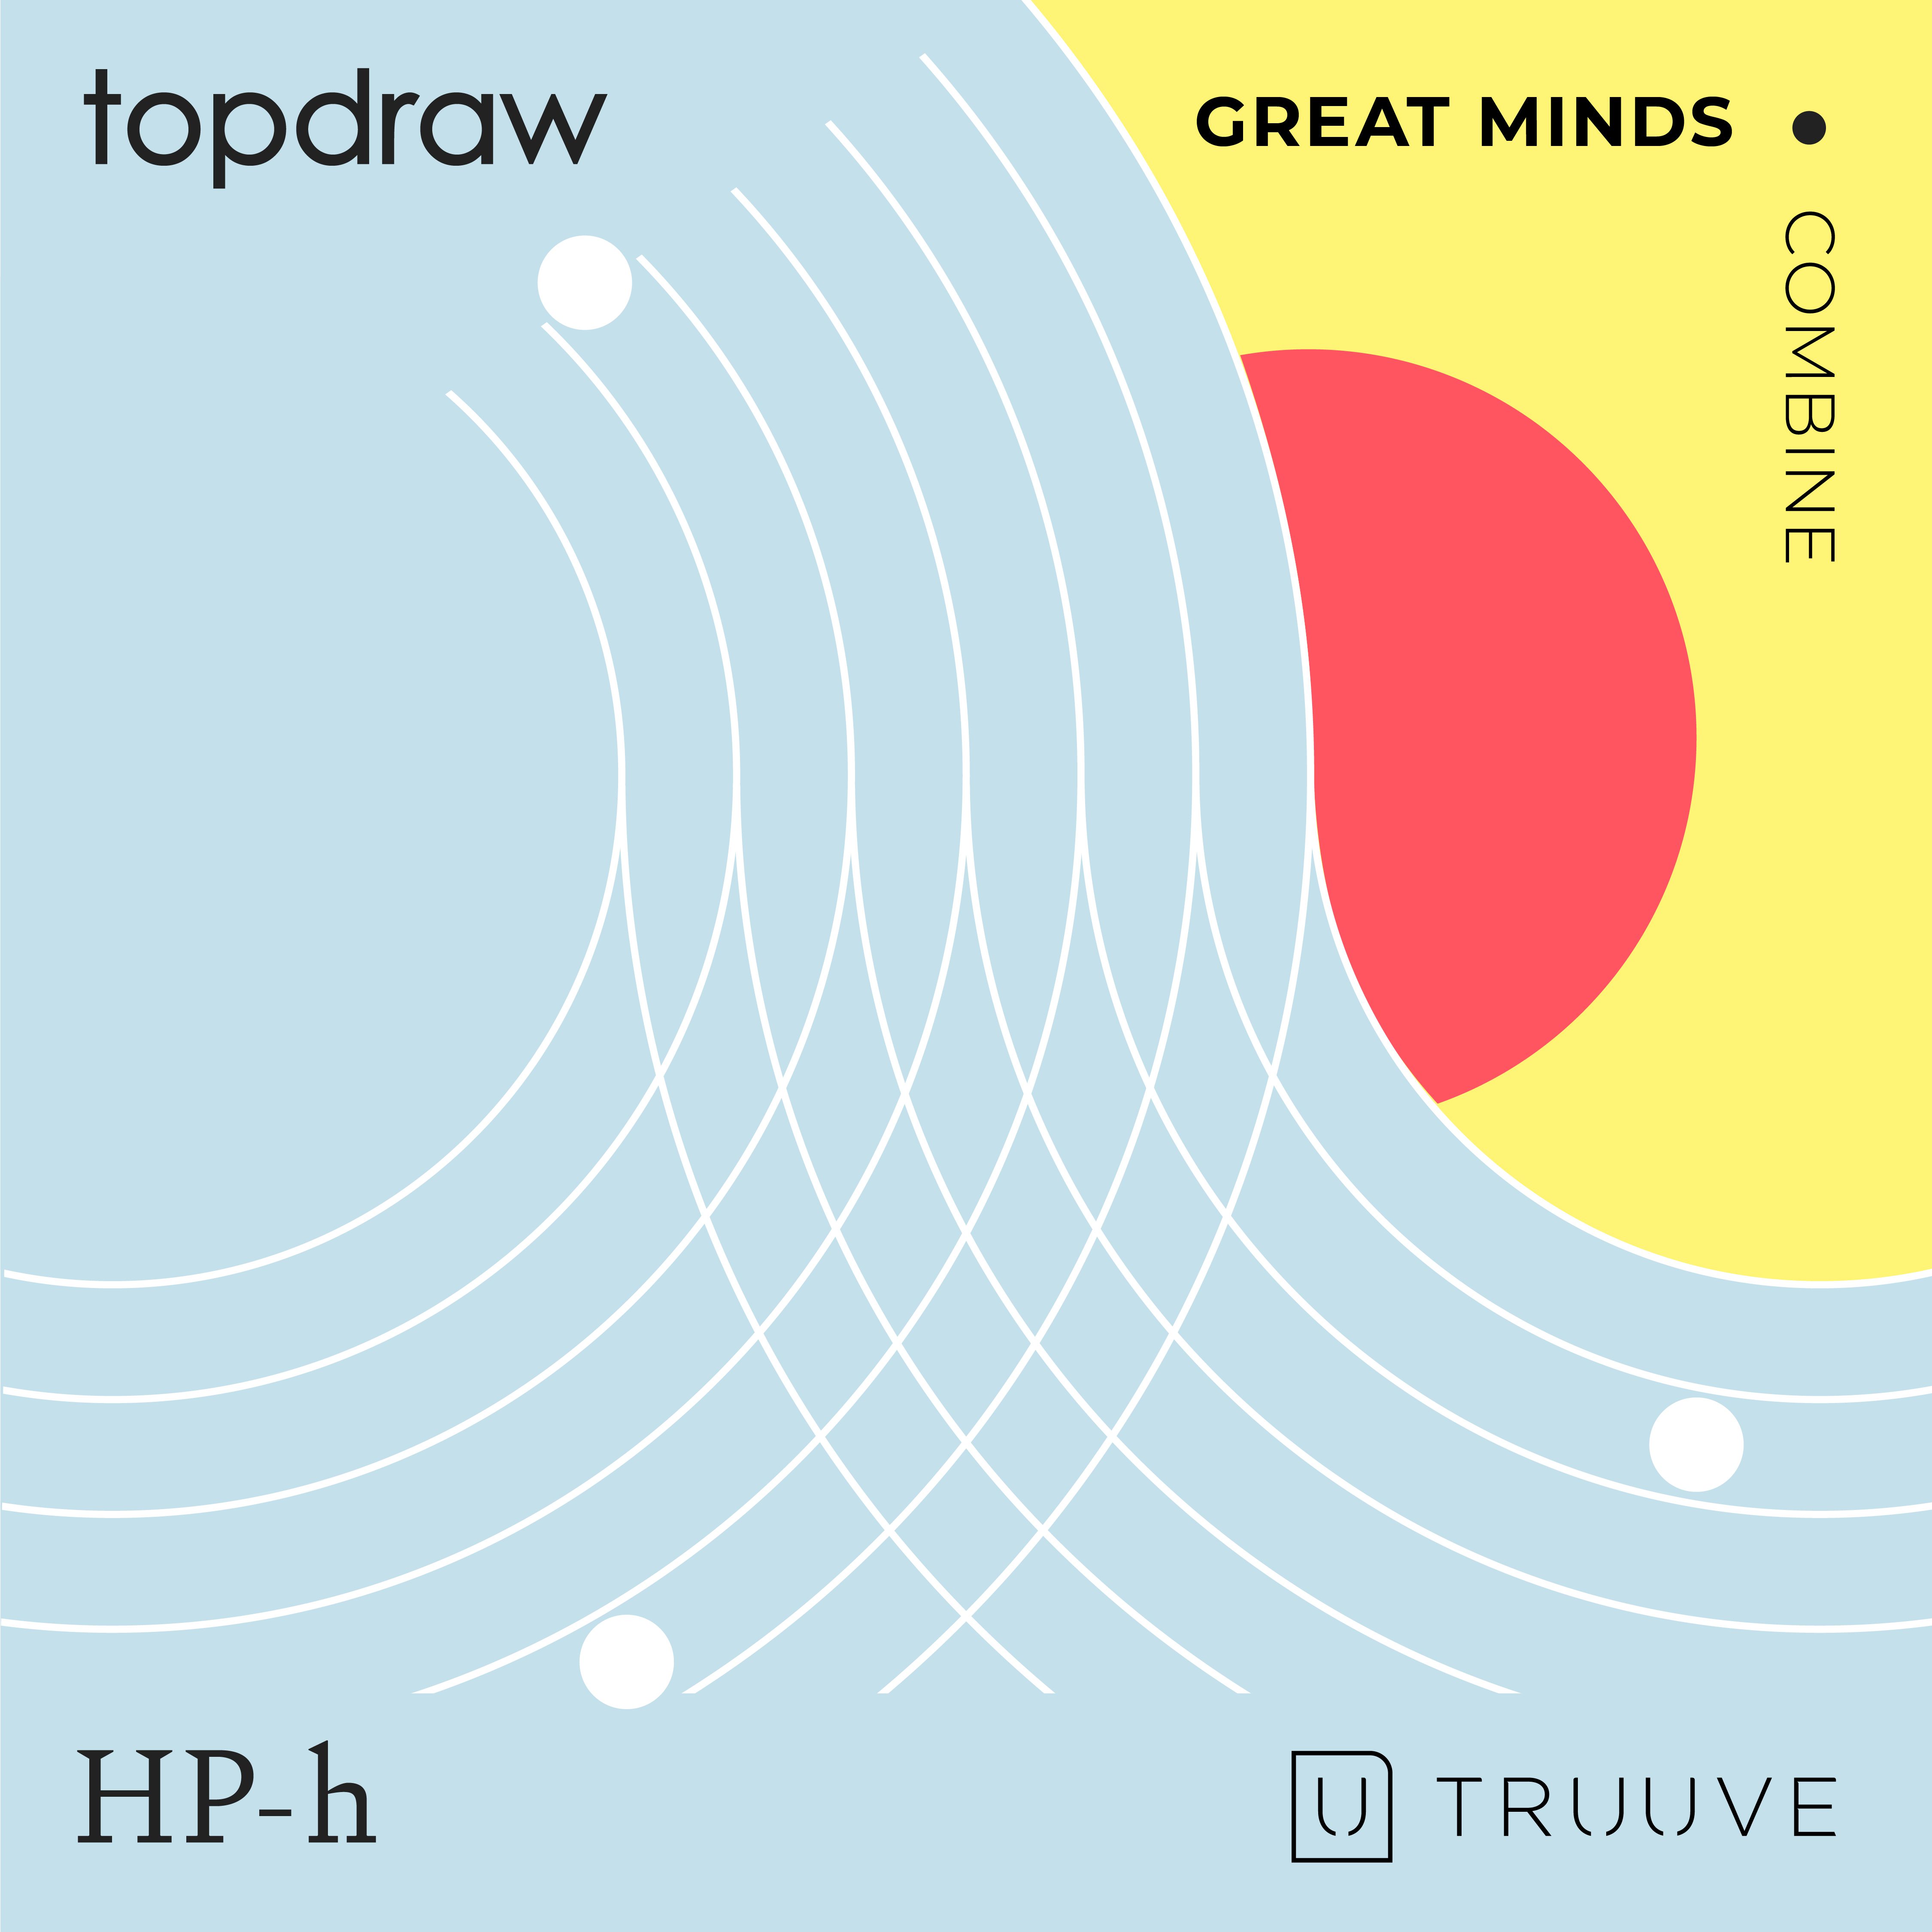 Great Minds Combine: Top Draw, Truuve and Haste Post-haste Unite